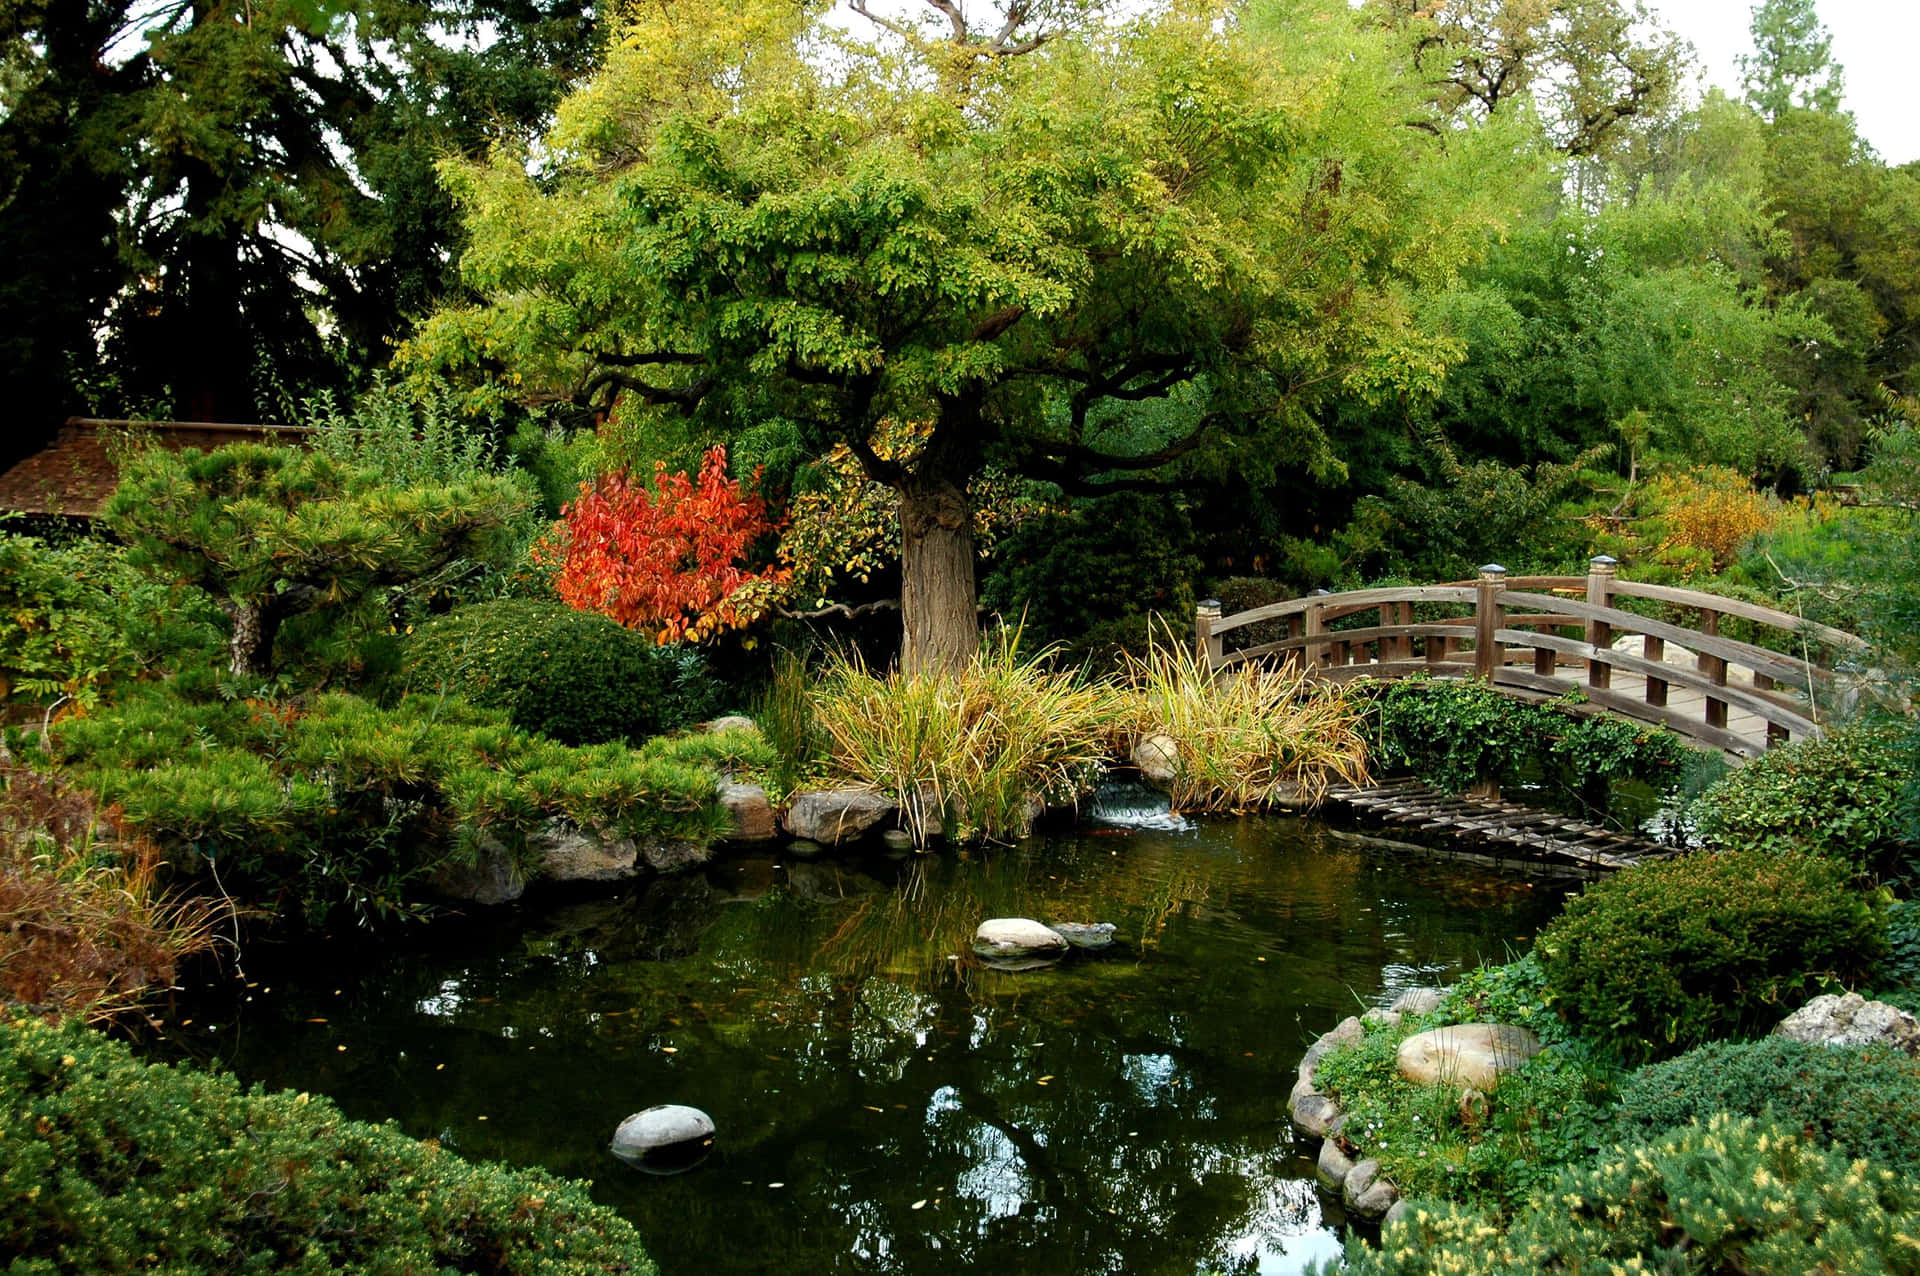 Find peace at the Tranquil Pond